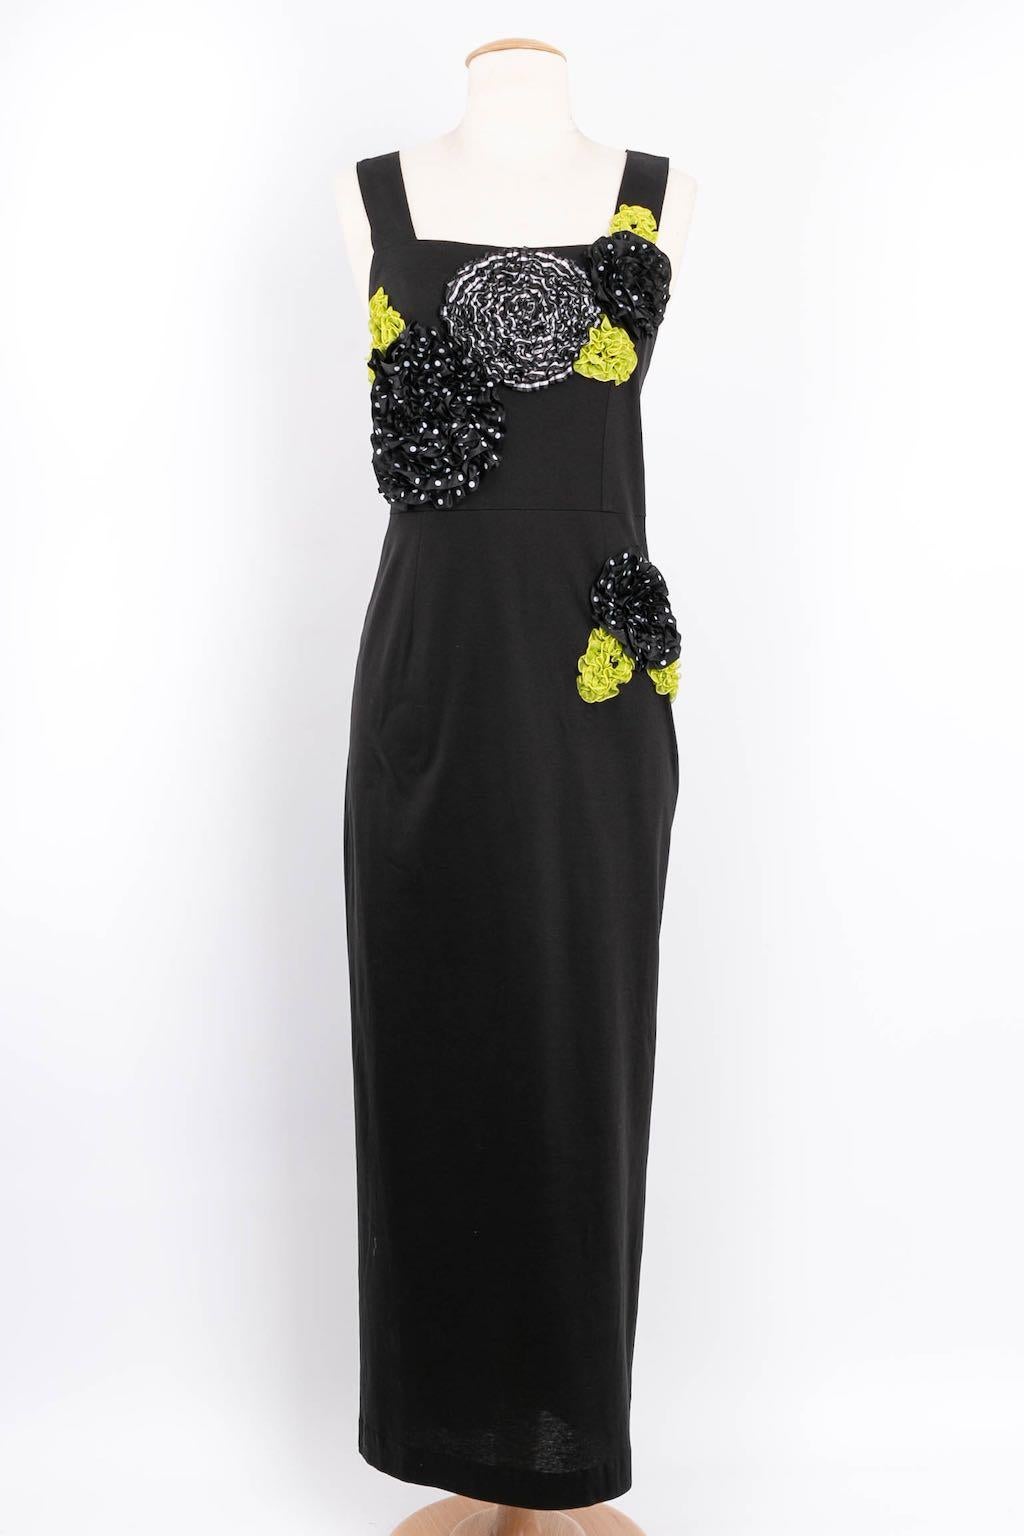 Chantal Thomass Cotton Dress Embroidered with Flowers Spring Collection, 1988 For Sale 6